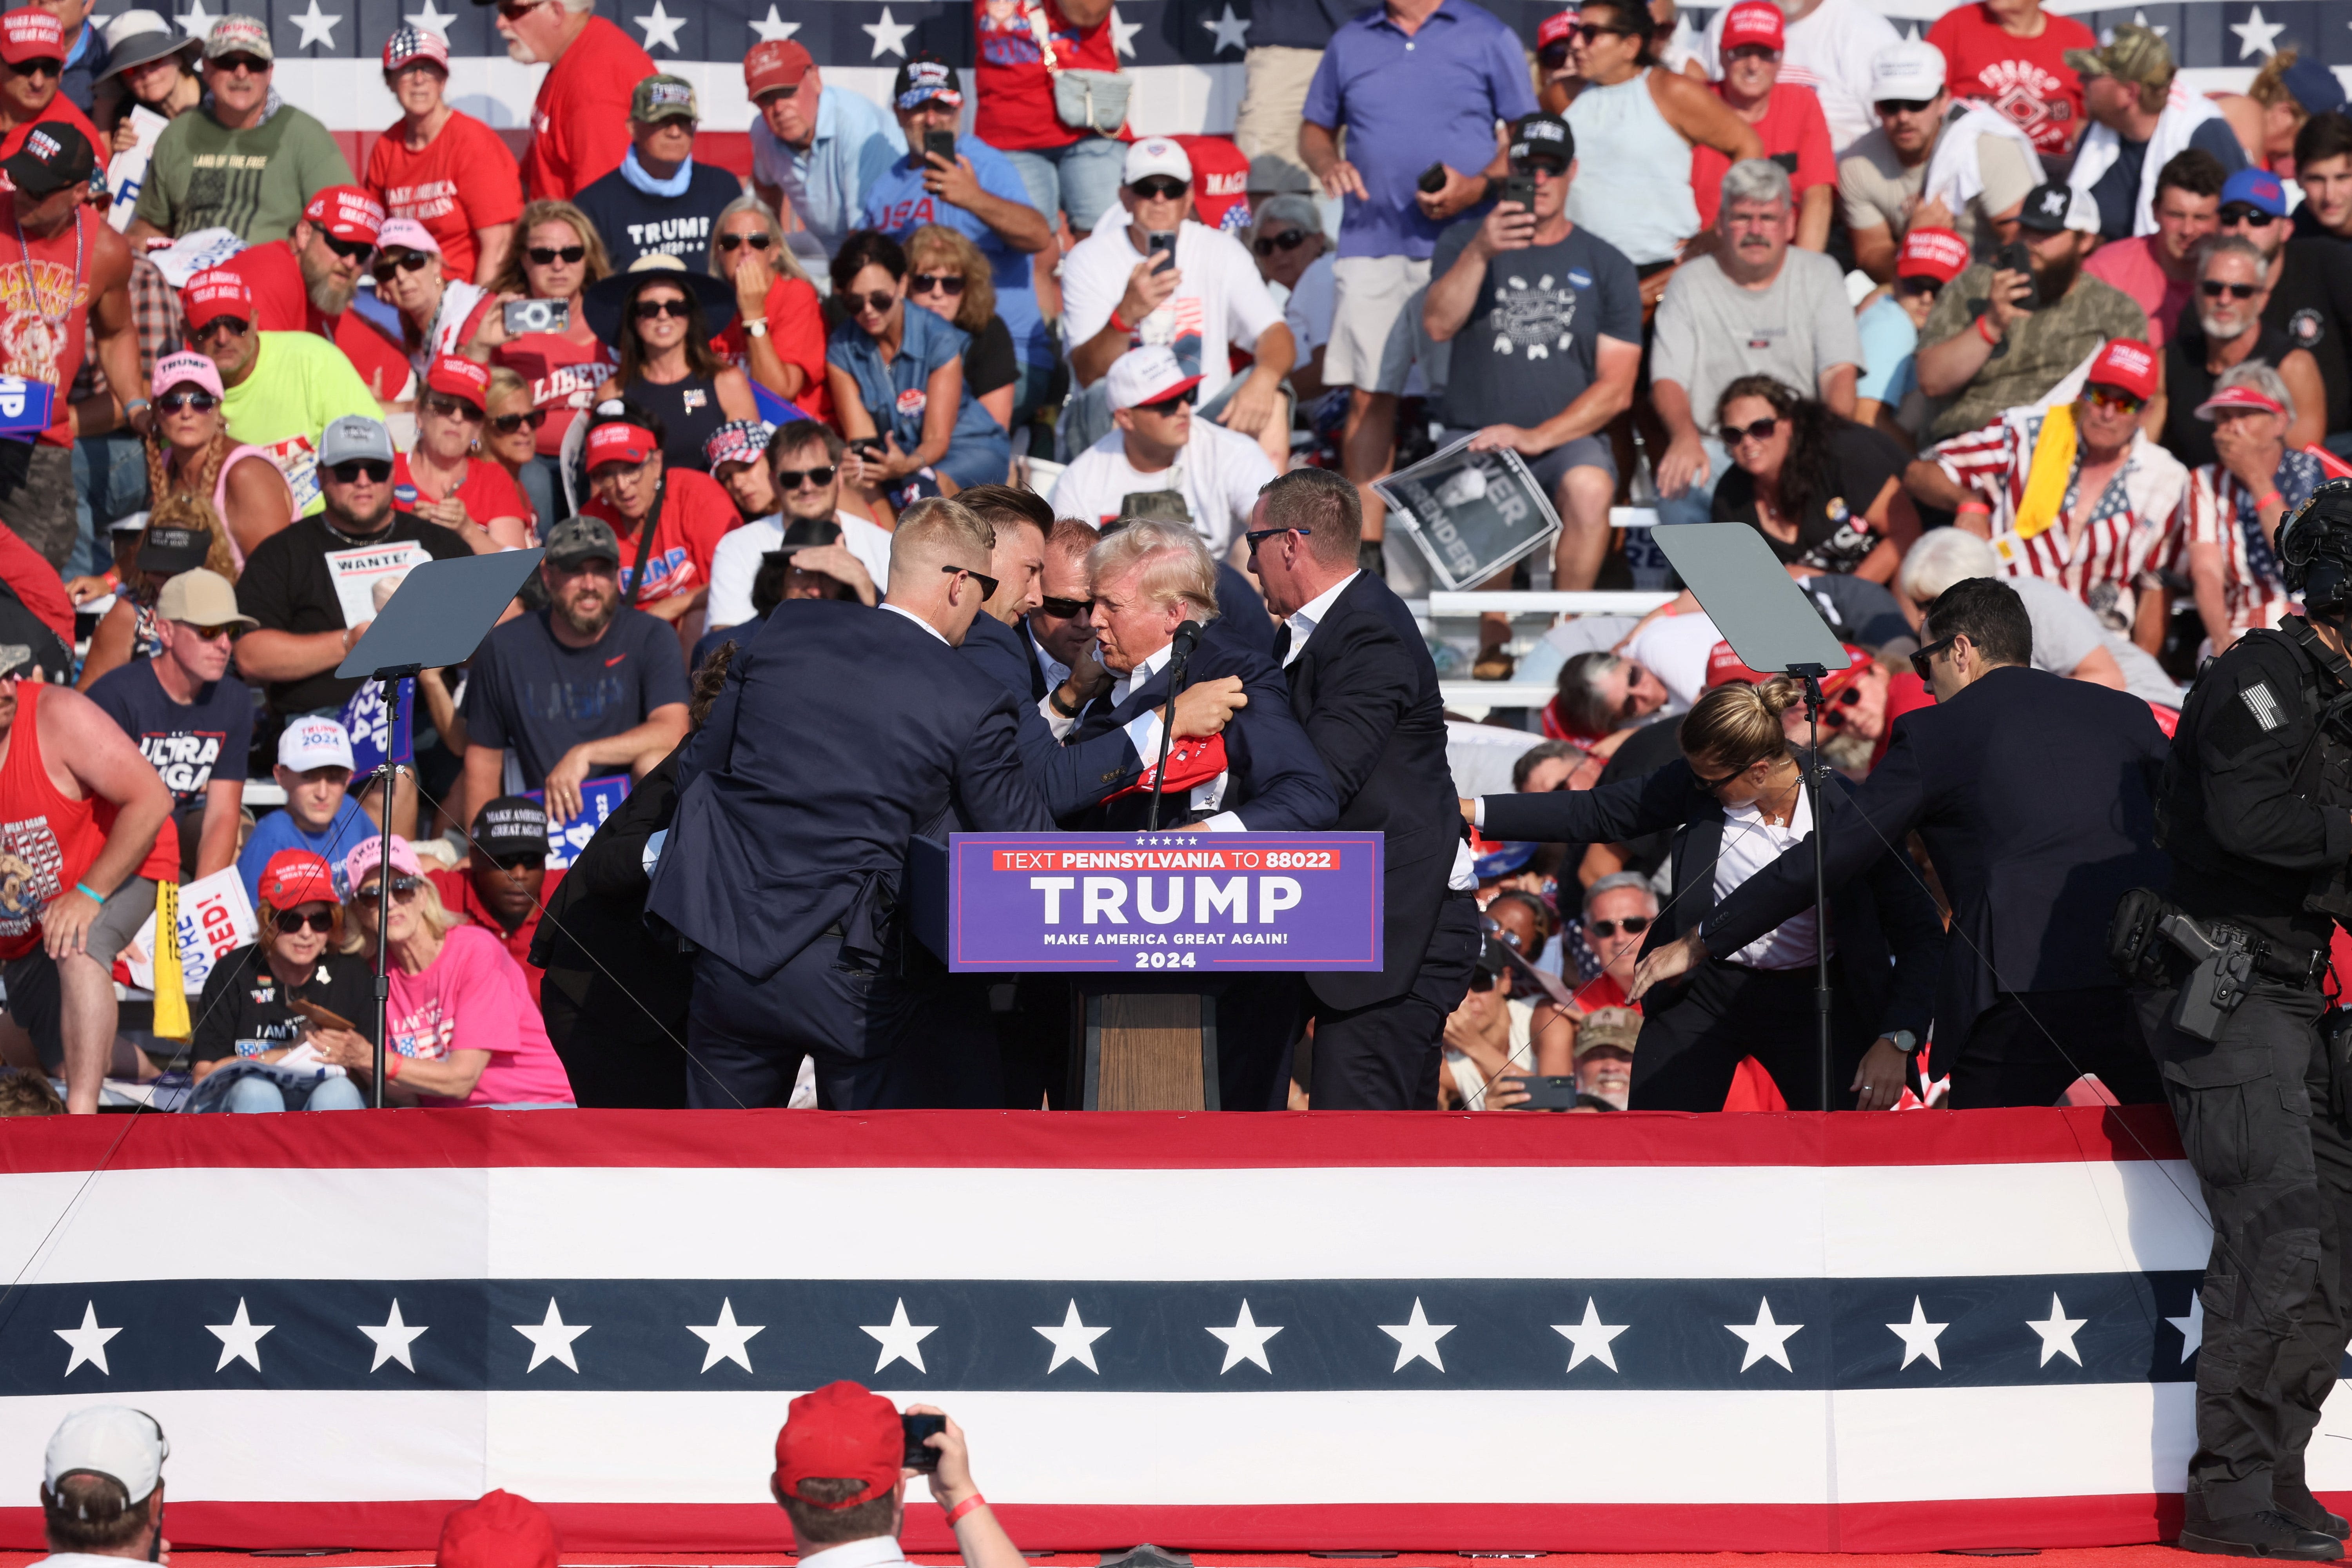 Wisconsin lawmakers and RNC officials weigh in after Trump rally incident